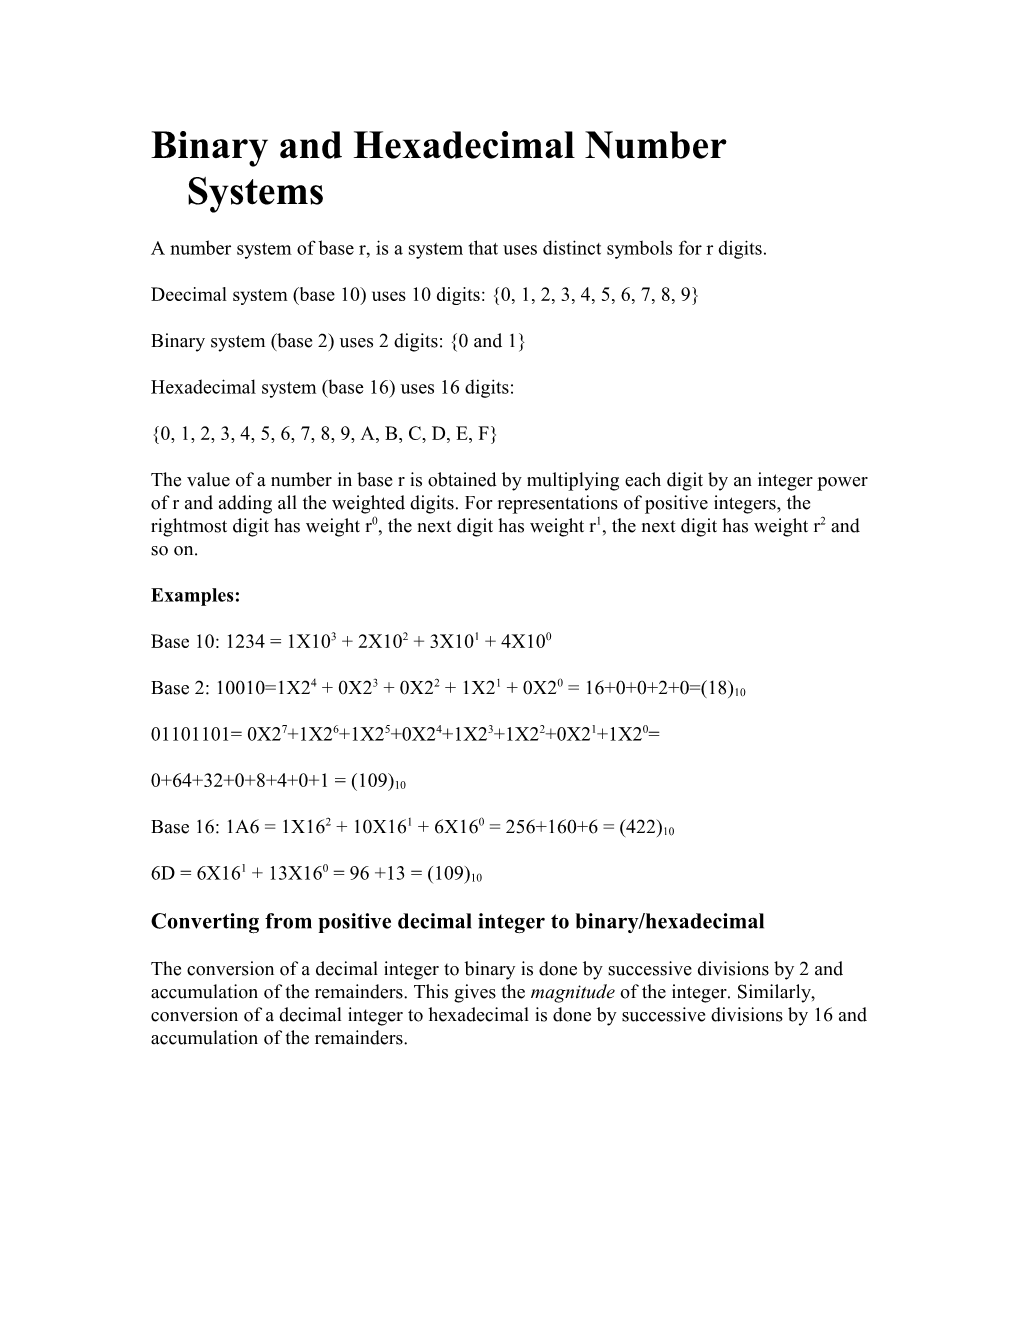 Lecture 4: Binary and Hexadecimal Number Systems